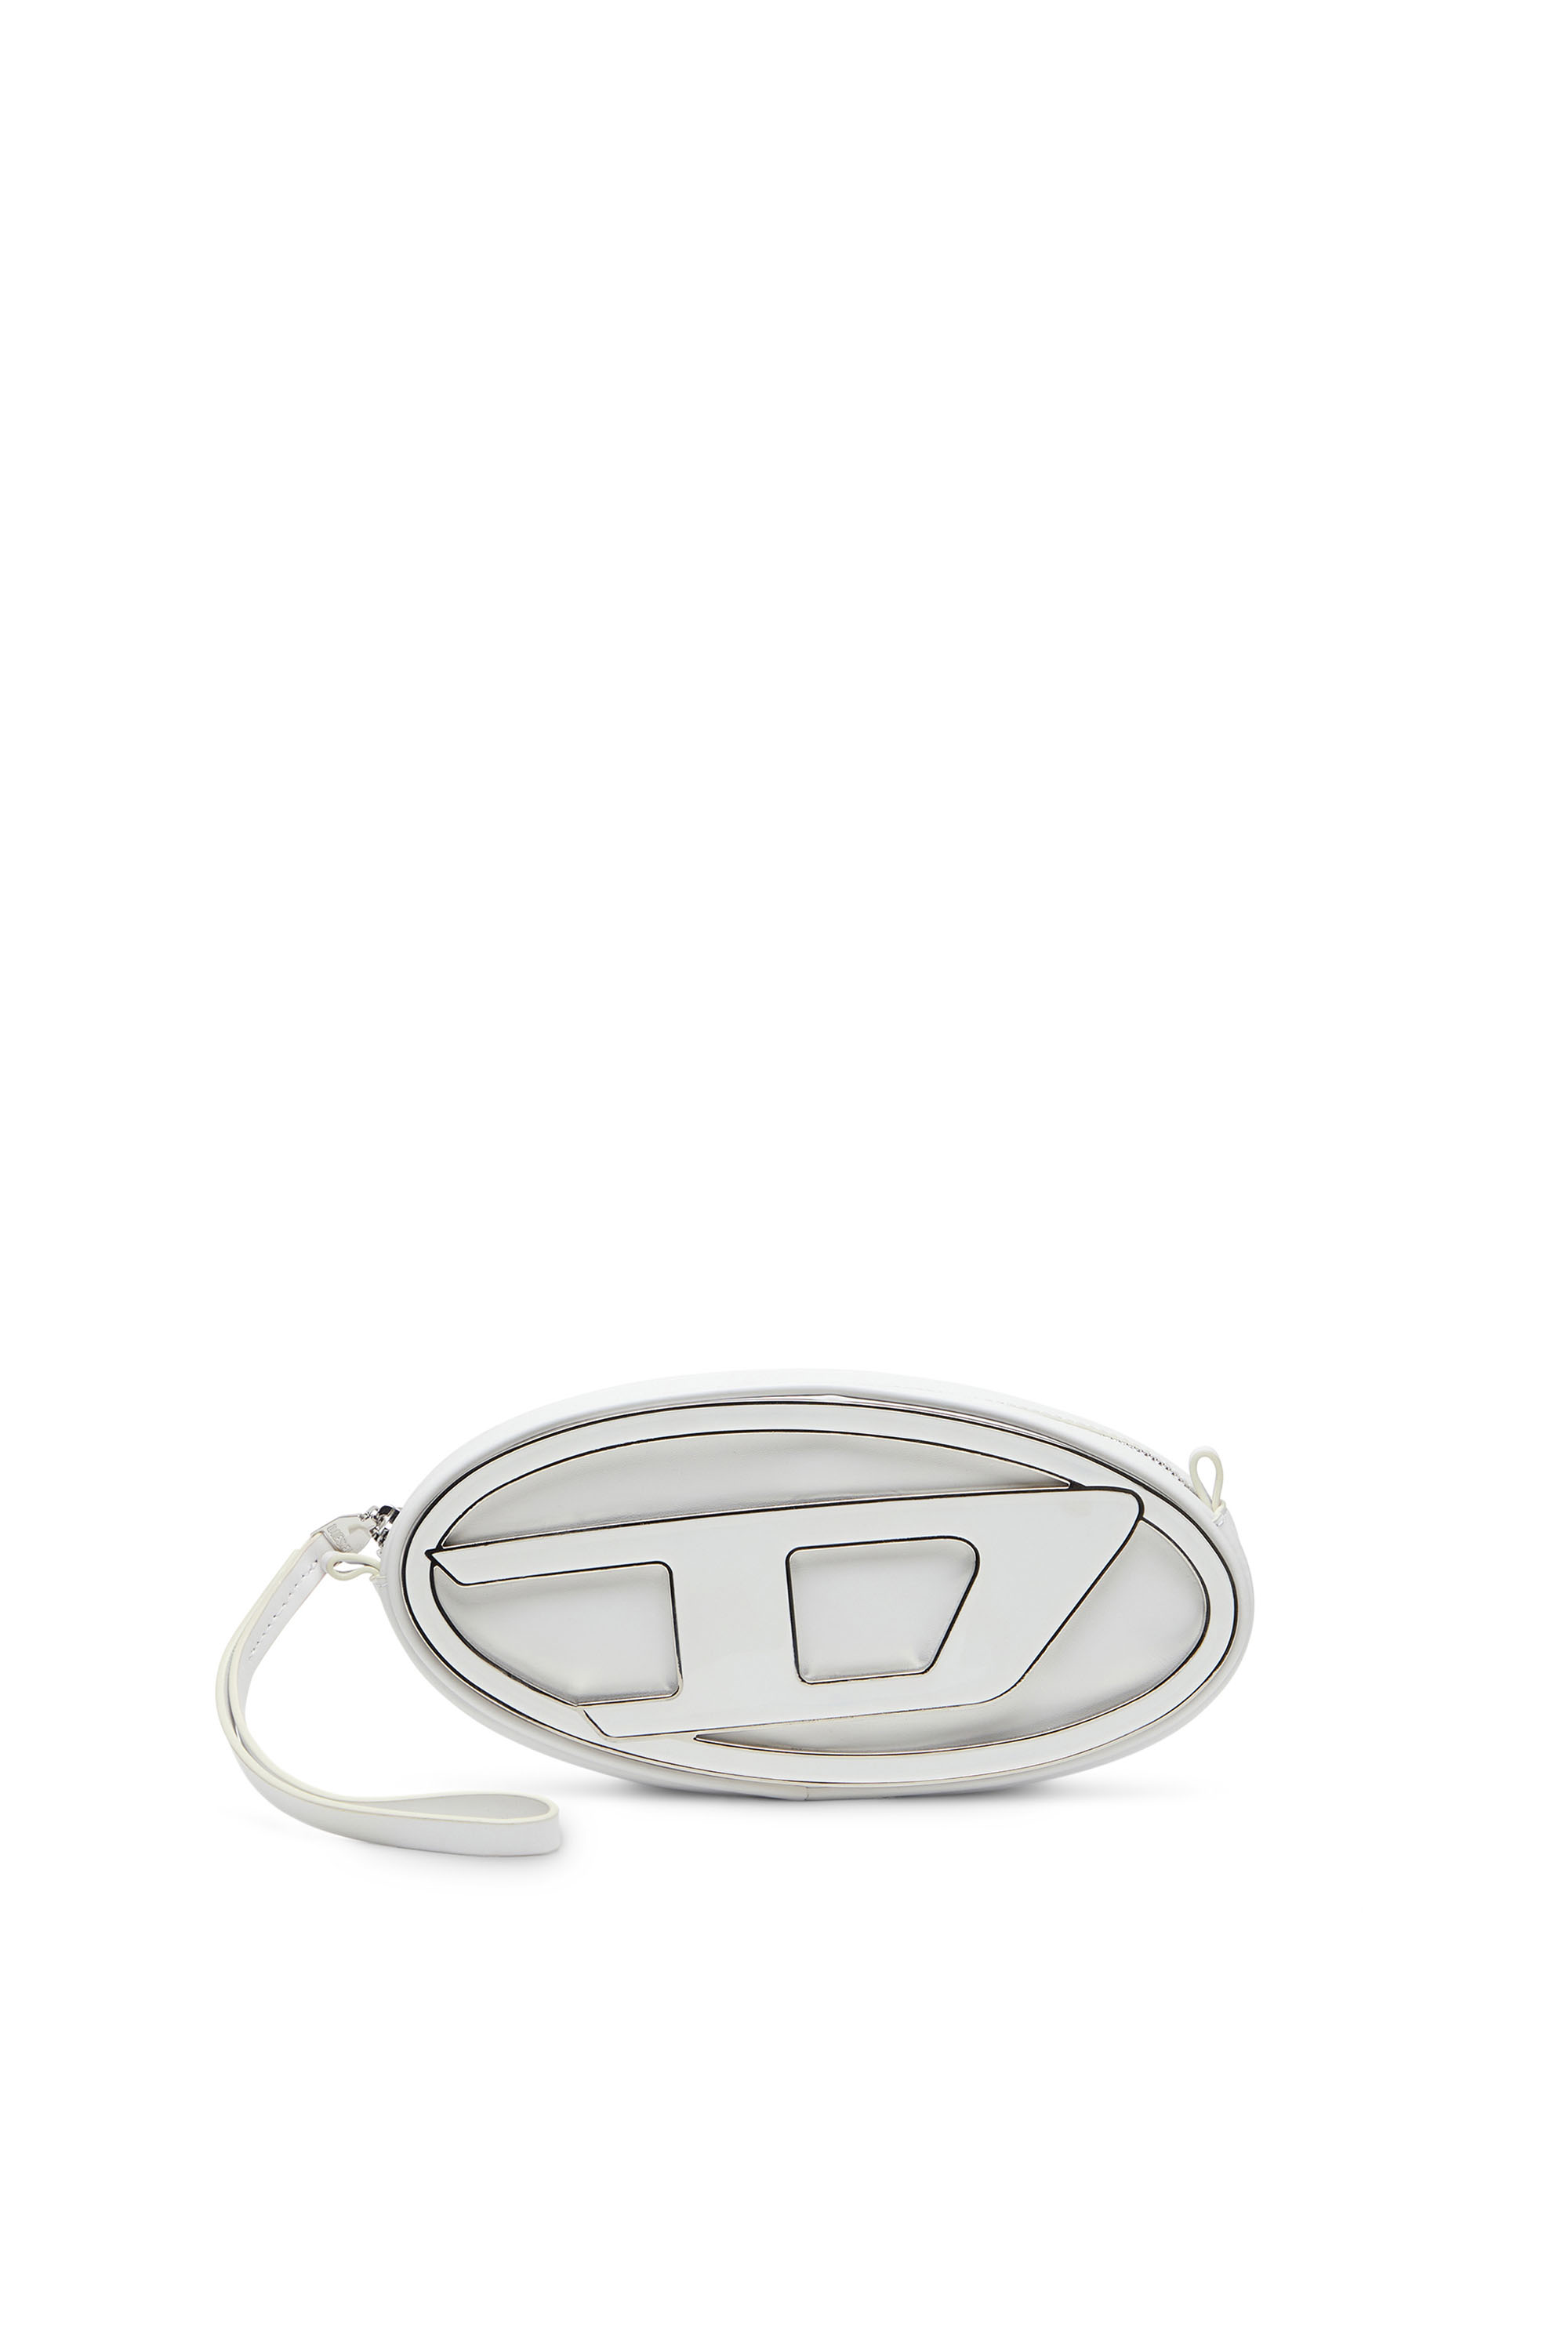 Diesel - 1DR-Pouch - Small leather crossbody with logo plaque - Crossbody Bags - Woman - Silver